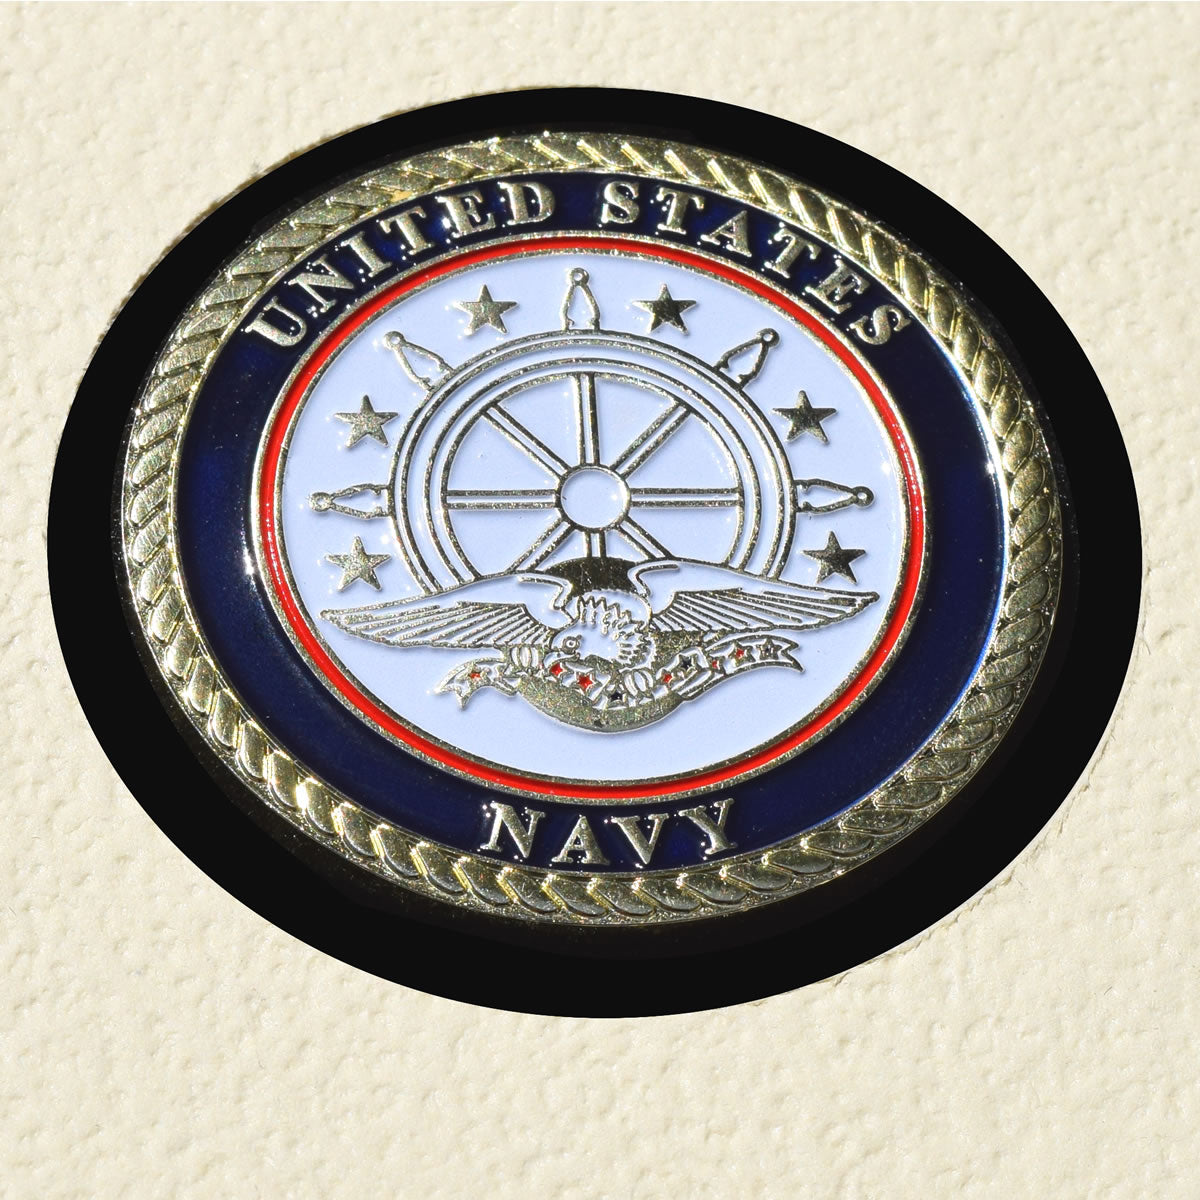 USS WILLIAM H STANDLEY CG-32 Detailed Coin